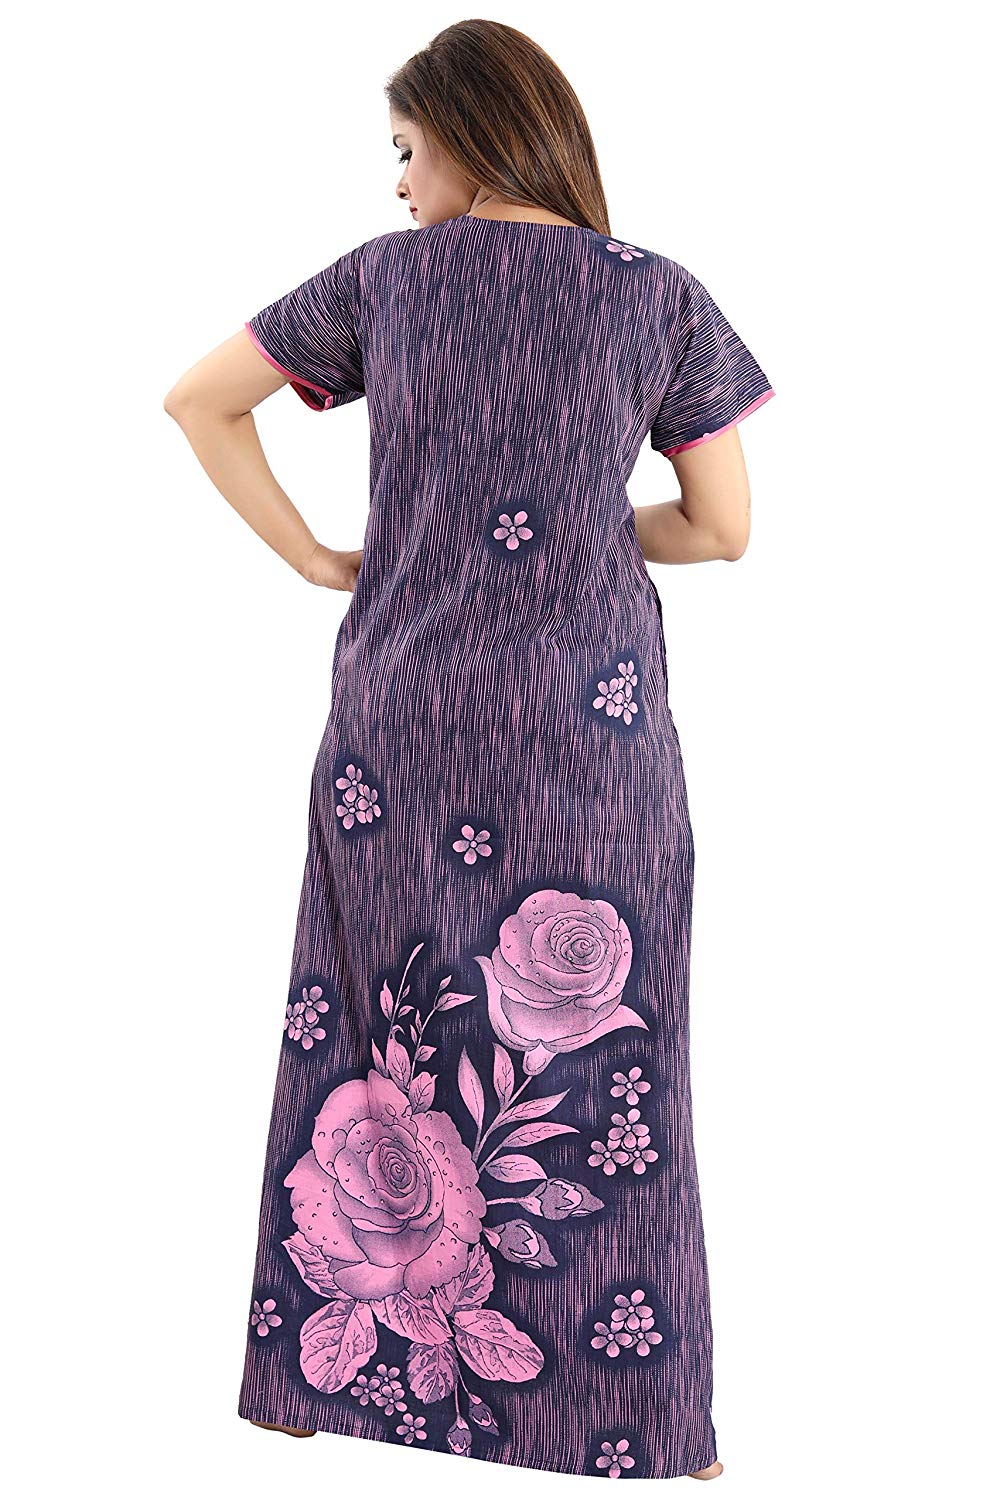 Simple Night Gown For Women in Sirsa-Haryana at best price by Angelina  Lifestyle - Justdial